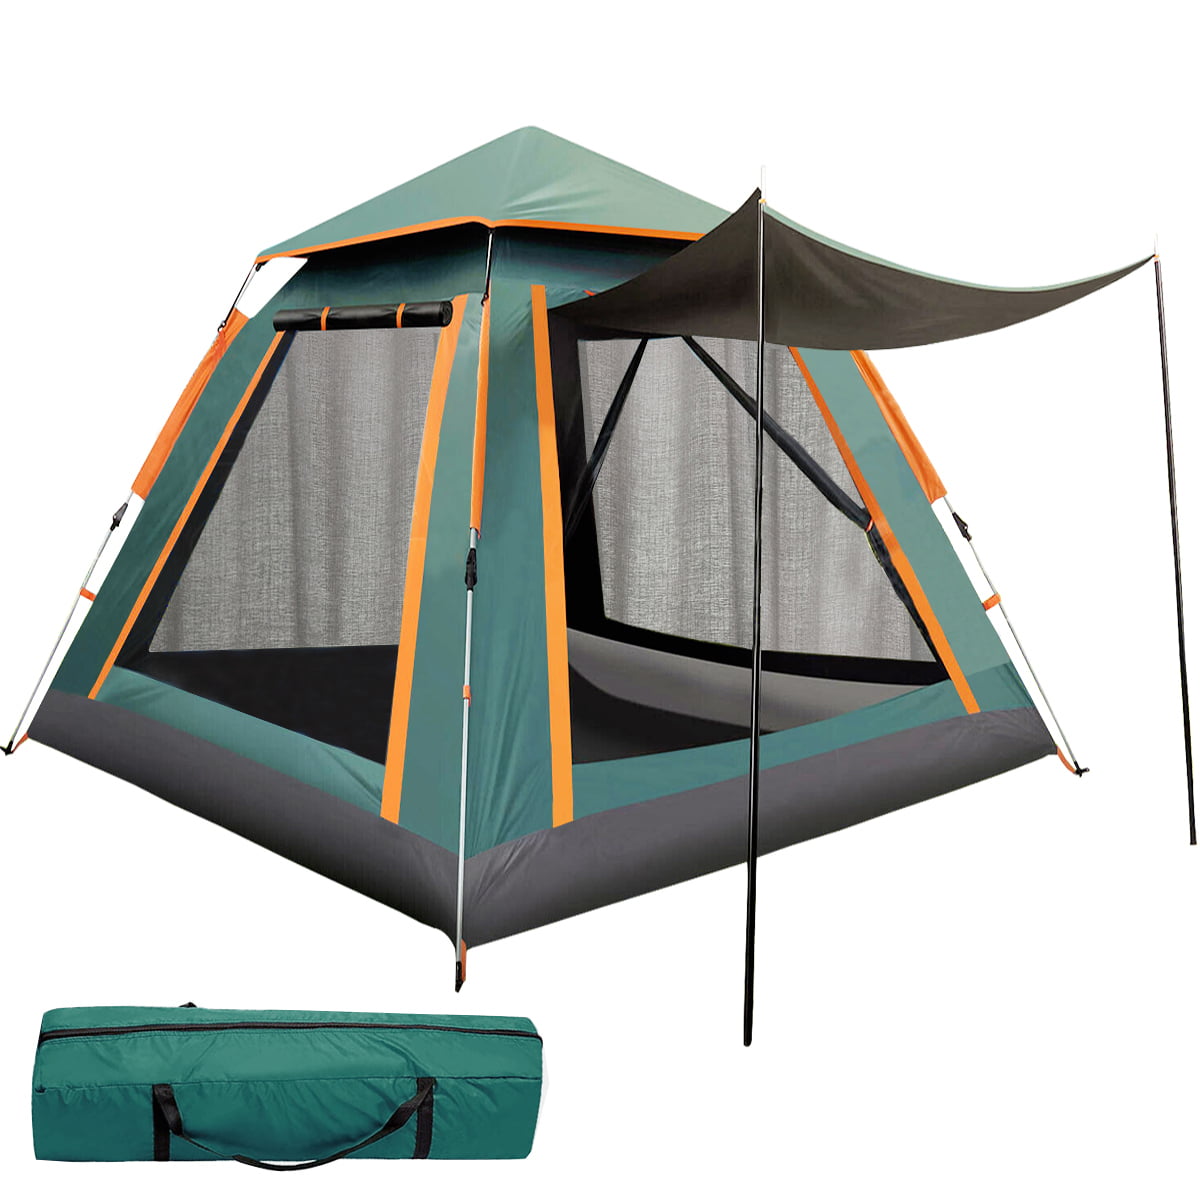 Tents for Camping, 3/4 Person Canbin Tent with Automatic Pop-Up Design and  Carry Bag,Waterproof Outdoor Tent for Family Hiking Camp Beach,Green 